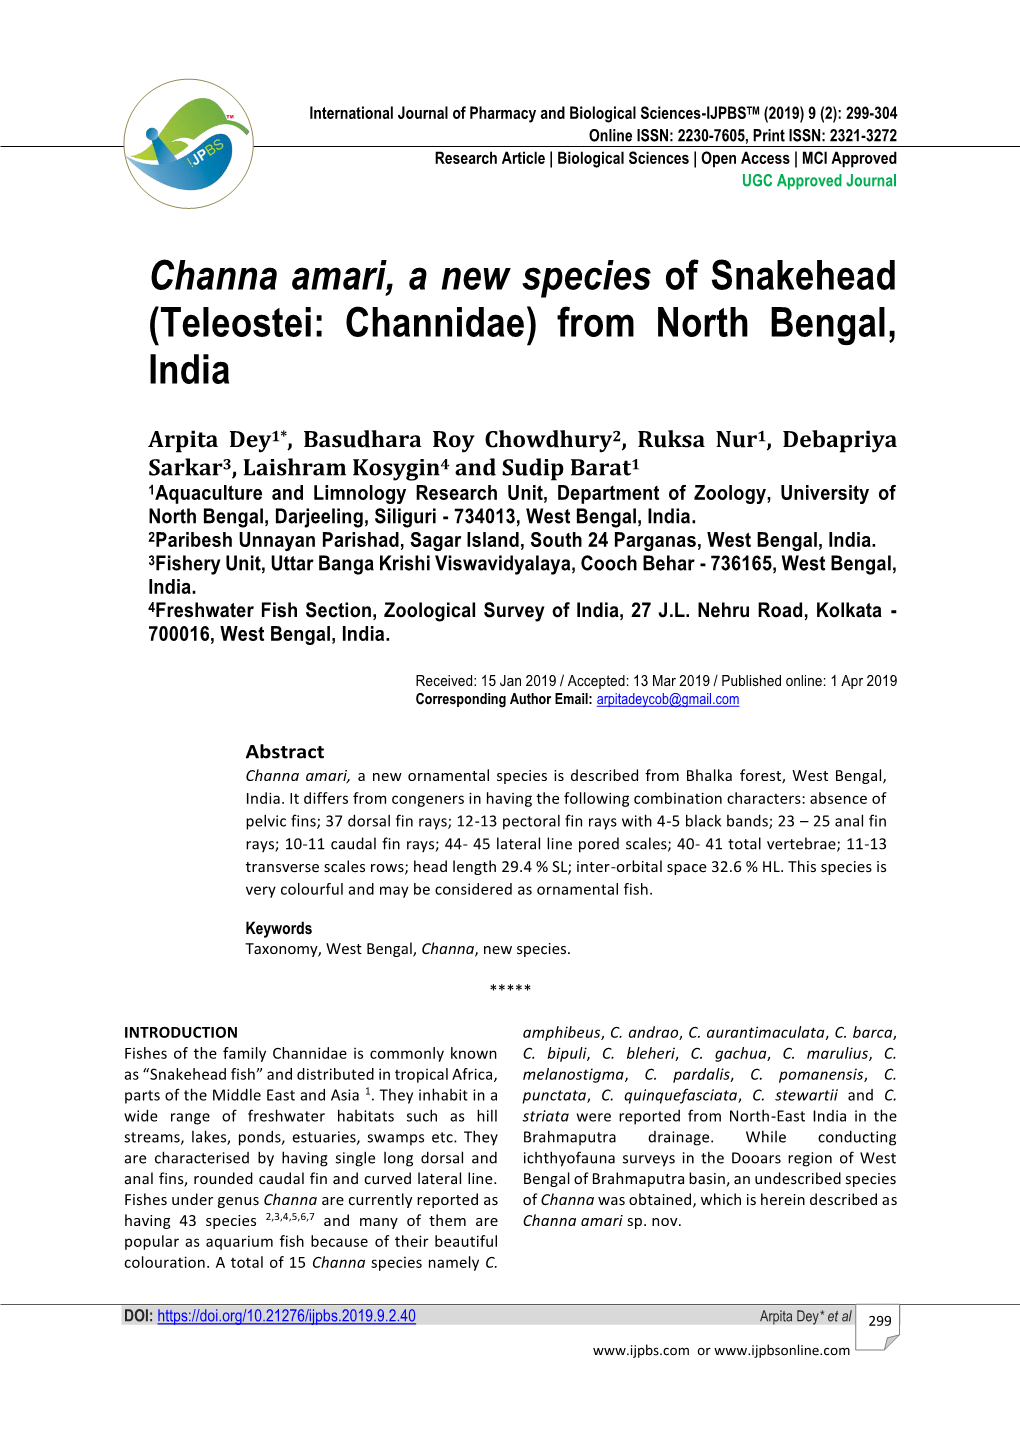 Channa Amari, a New Species of Snakehead (Teleostei: Channidae) from North Bengal, India